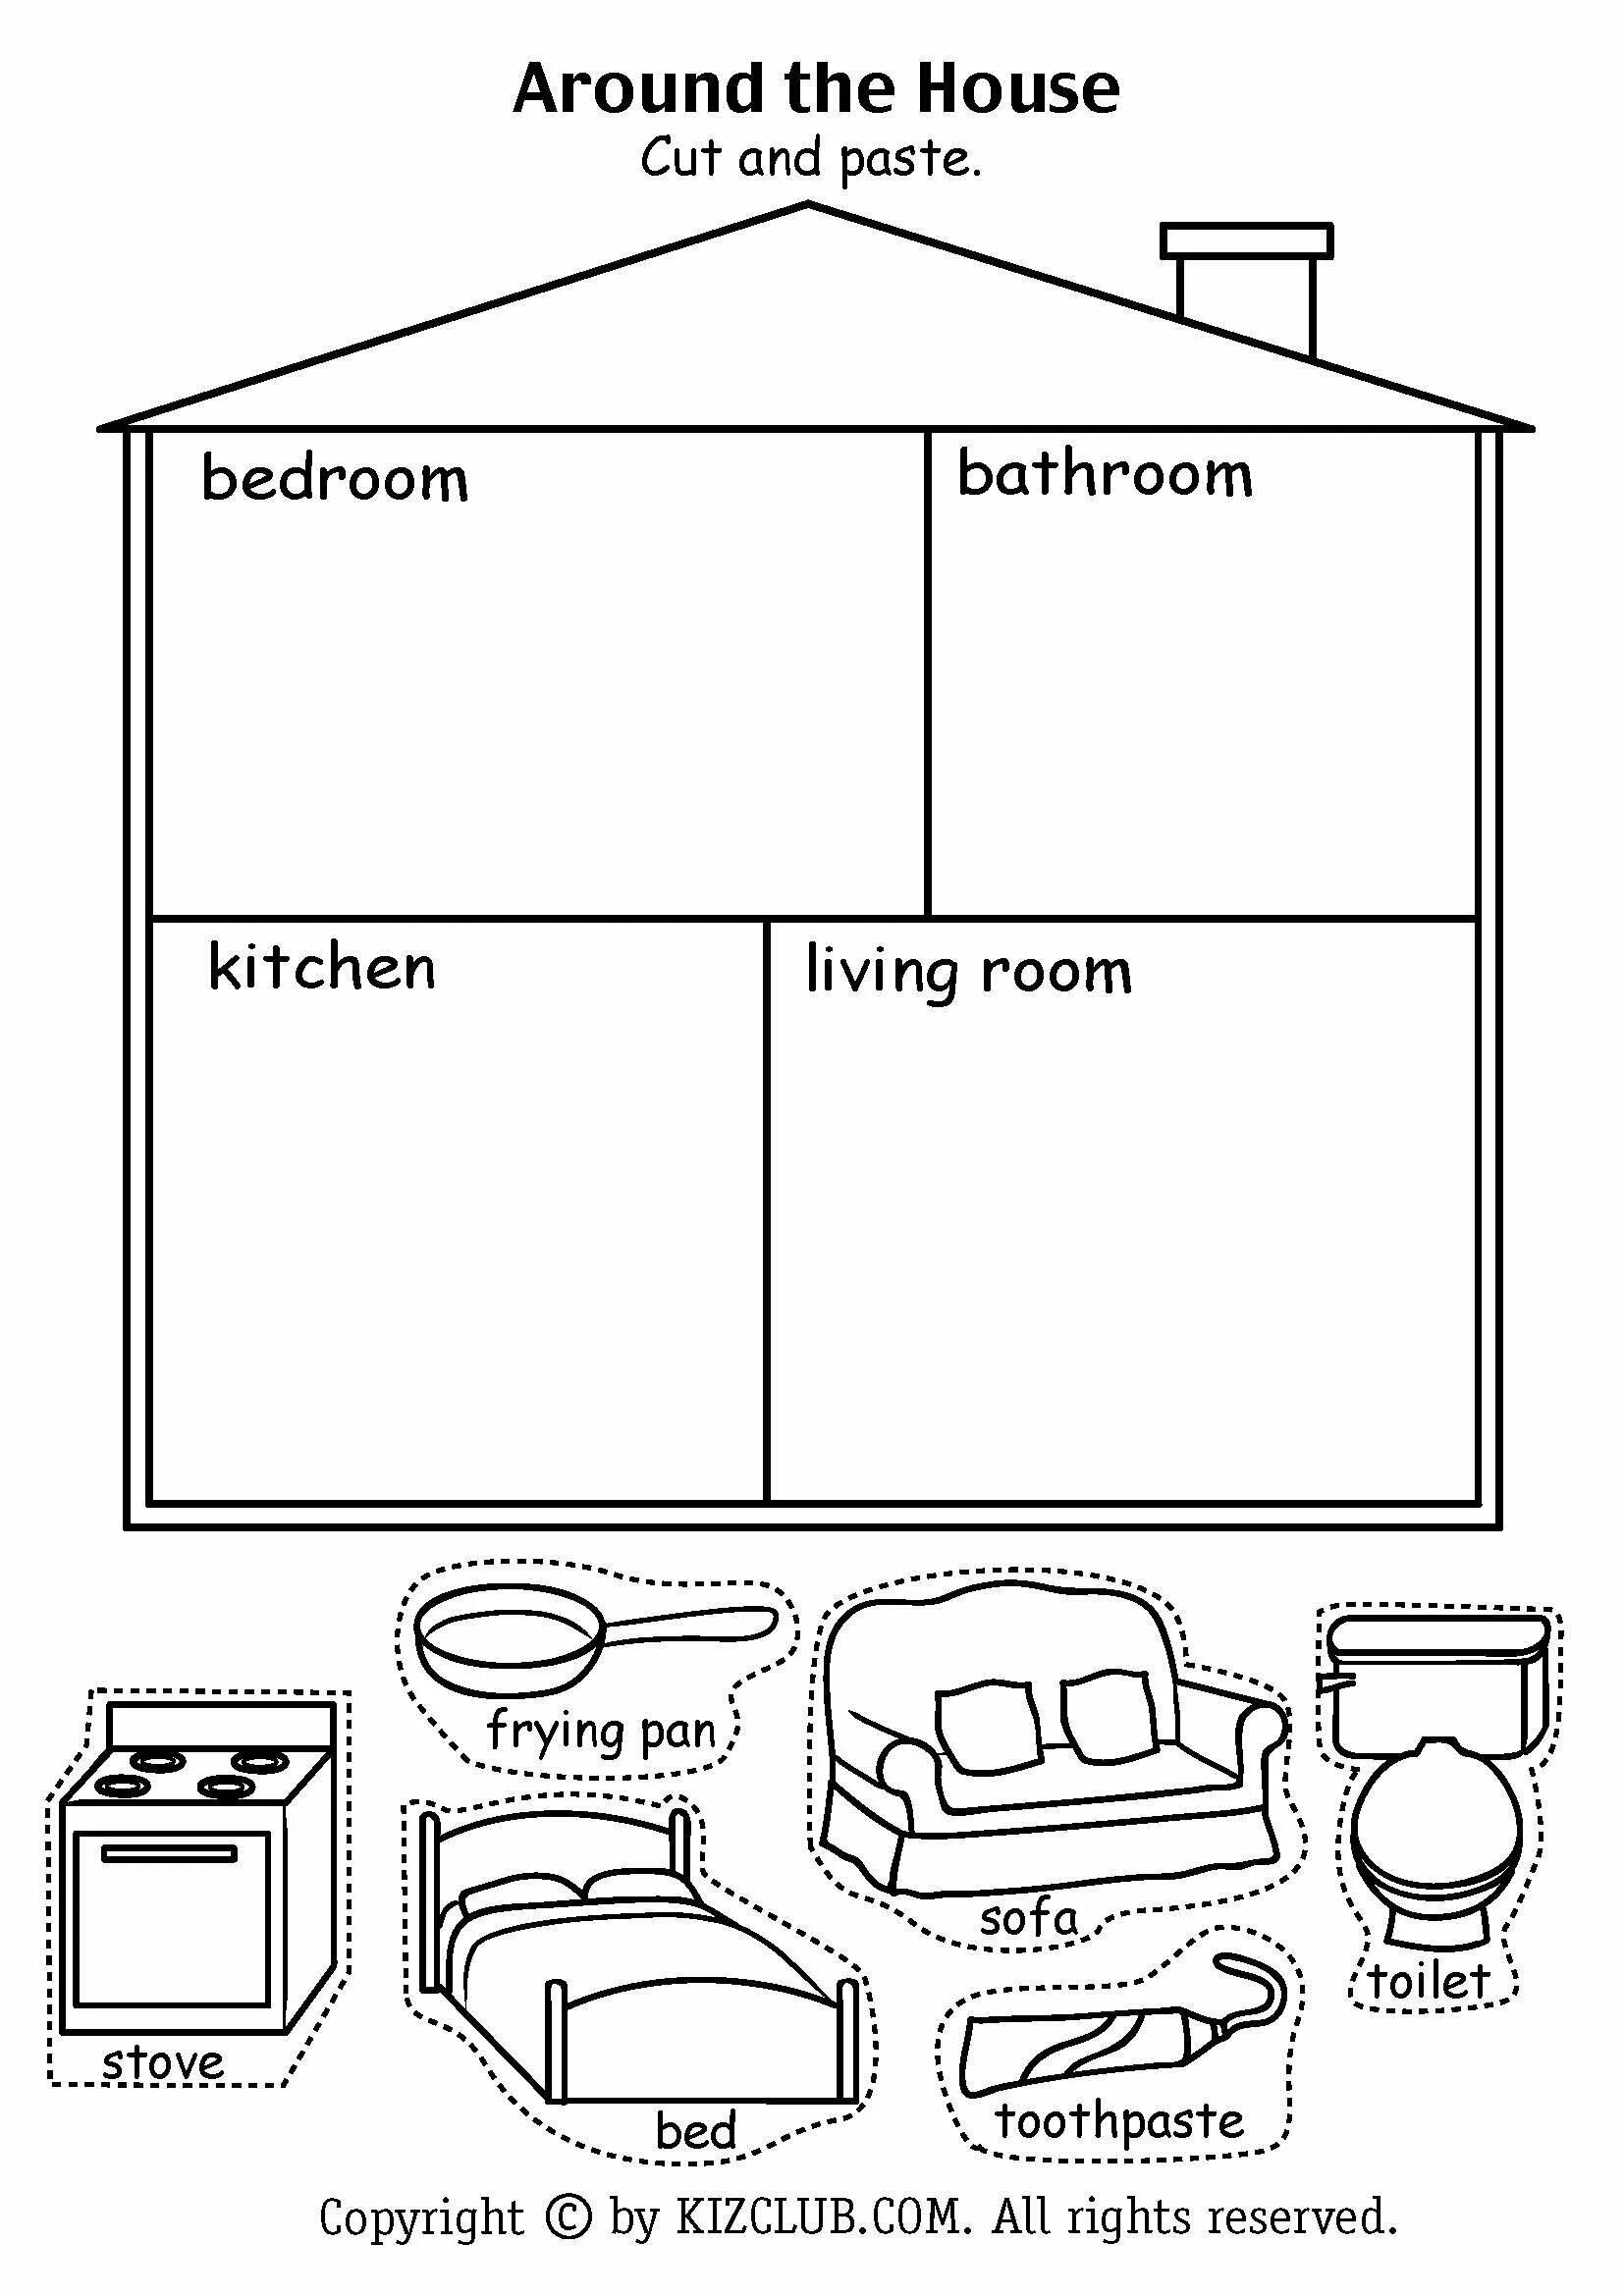 Английский язык Parts of the House kindergarden. Комнаты Worksheets for Kids. Rooms in the House задания. House задания для детей английский.